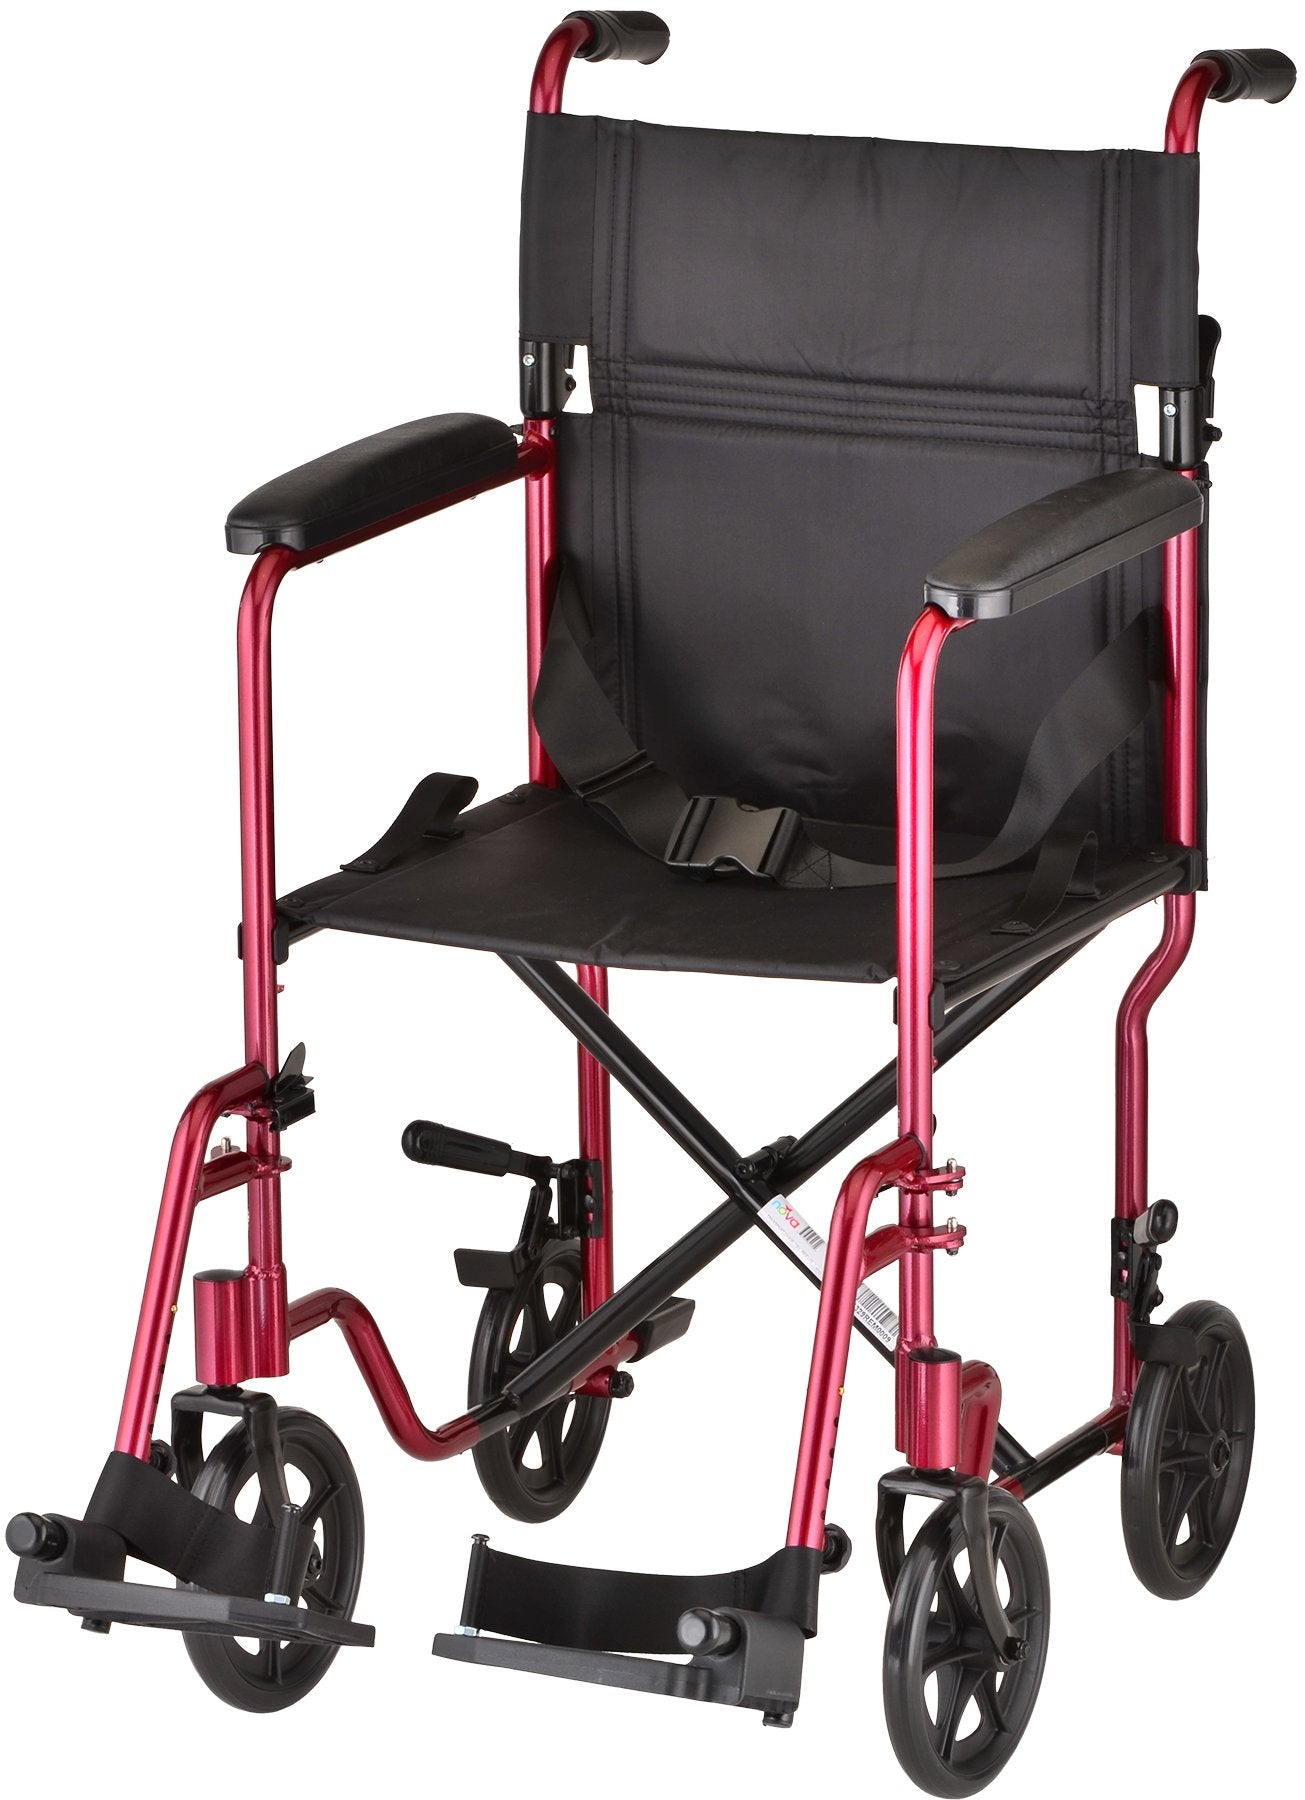 NOVA Medical Products Lightweight Transport/Wheelchair, Red, 1 Count